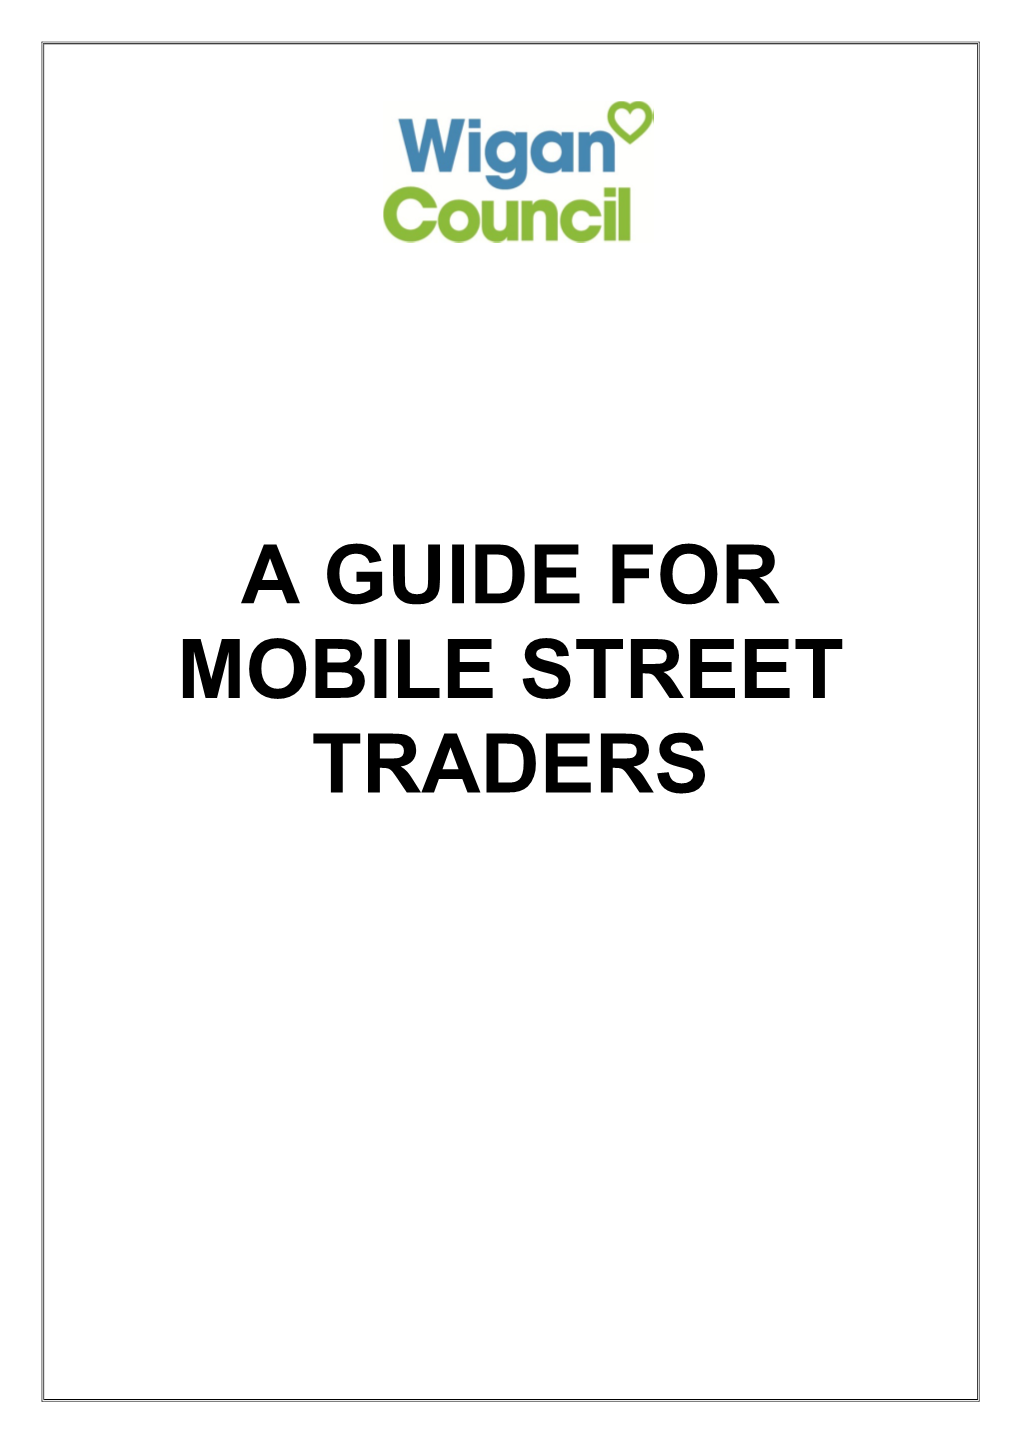 A Guide for Mobile Street Traders Contents